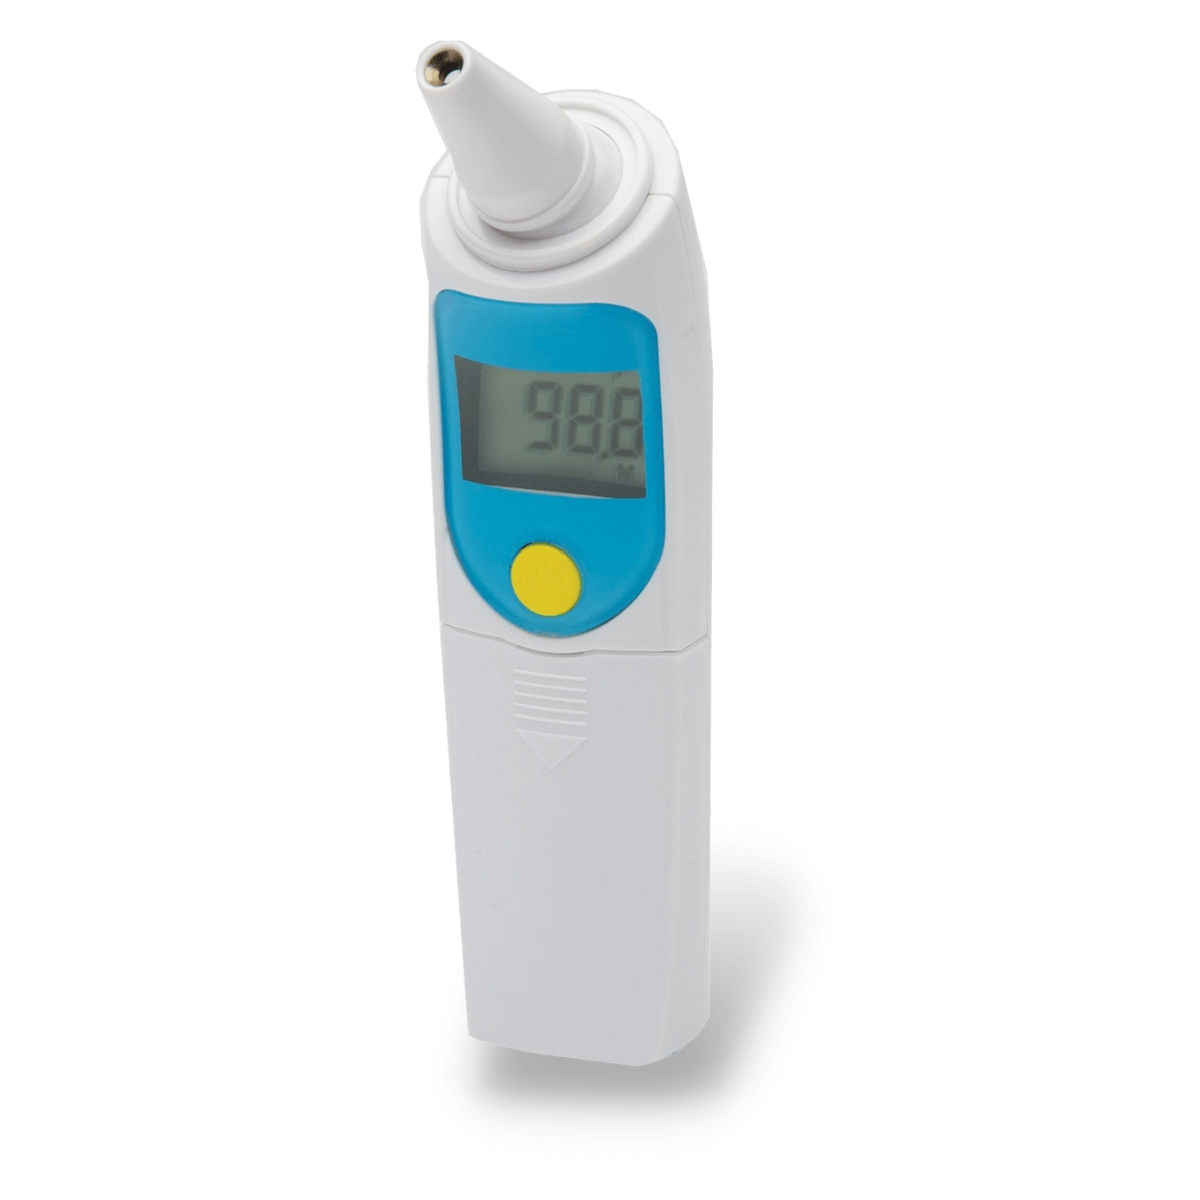 https://carroll.org/wp-content/uploads/2021/07/Talking-Ear-Thermometer-1.png